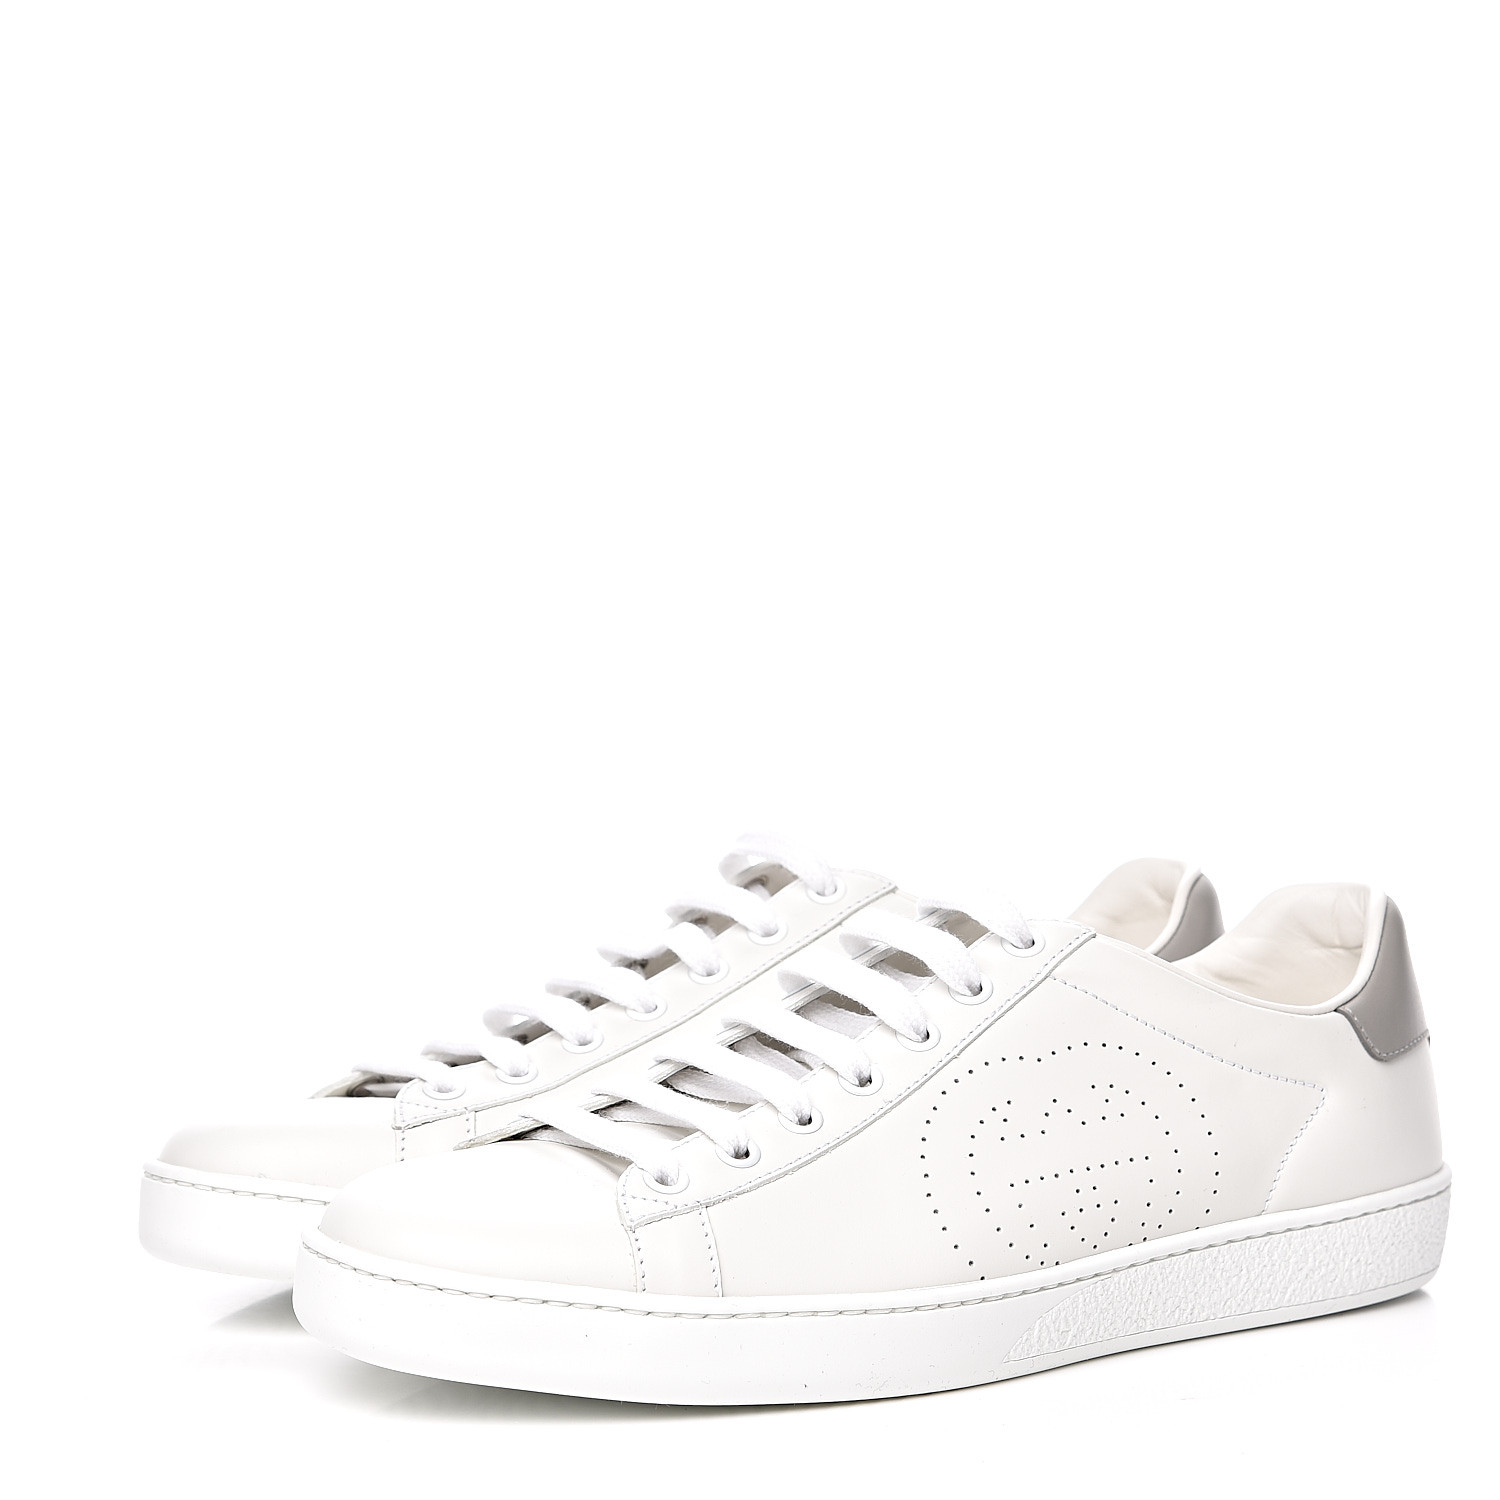 GUCCI Perforated Calfskin Womens Interlocking G Ace Sneakers 39.5 White ...